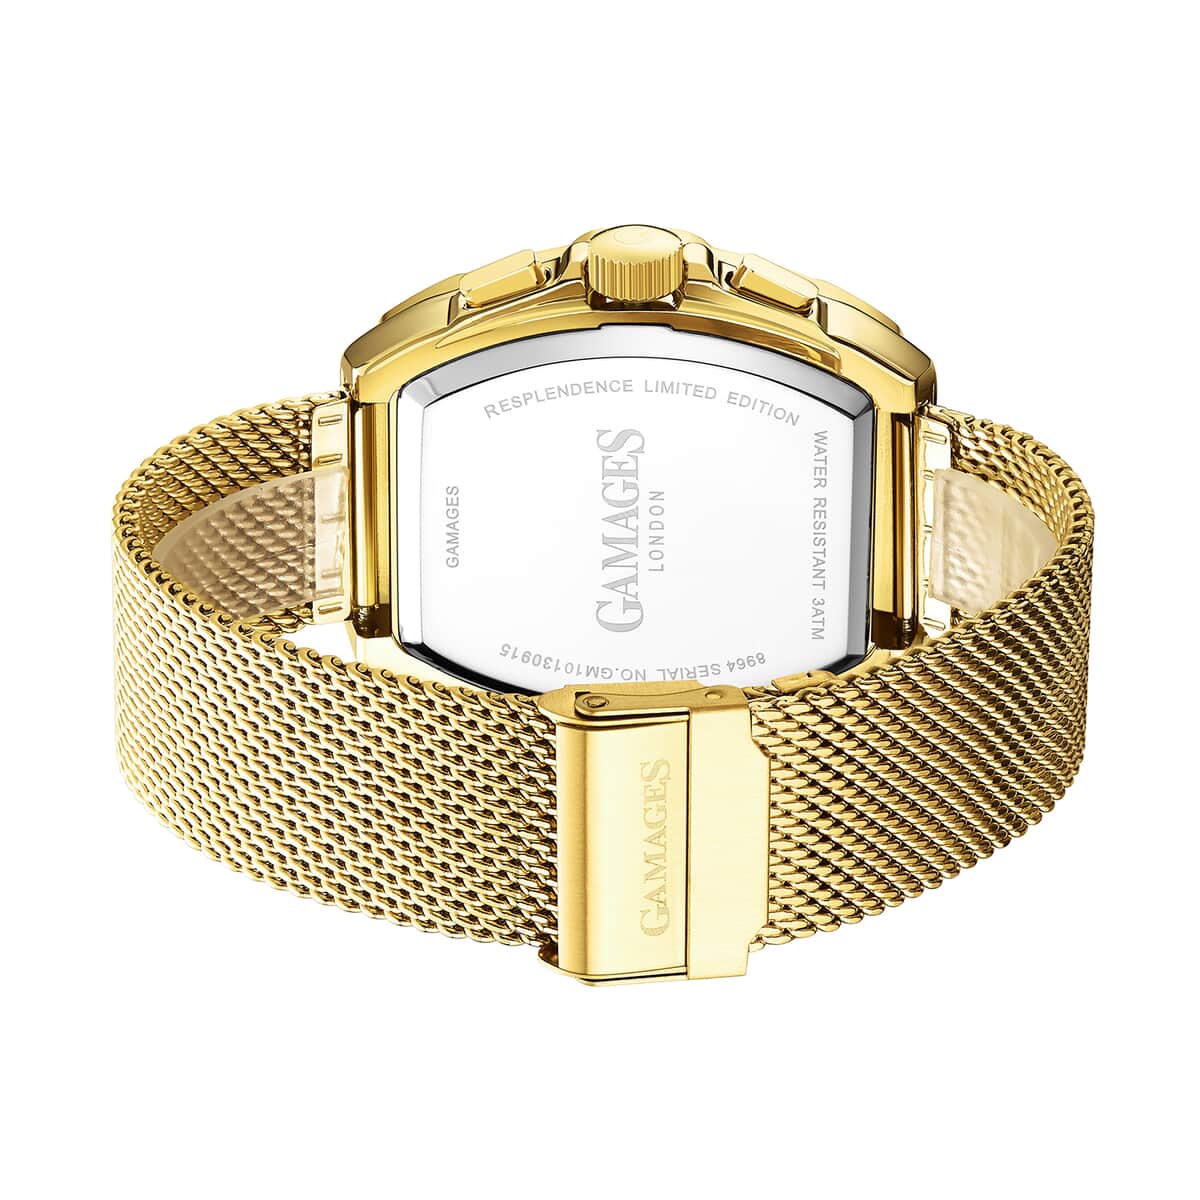 GAMAGES OF LONDON Limited Edition Hand Assembled Resplendence Automatic Movement Mesh Strap Watch in ION Plated Gold with Green Dial (41mm) image number 3